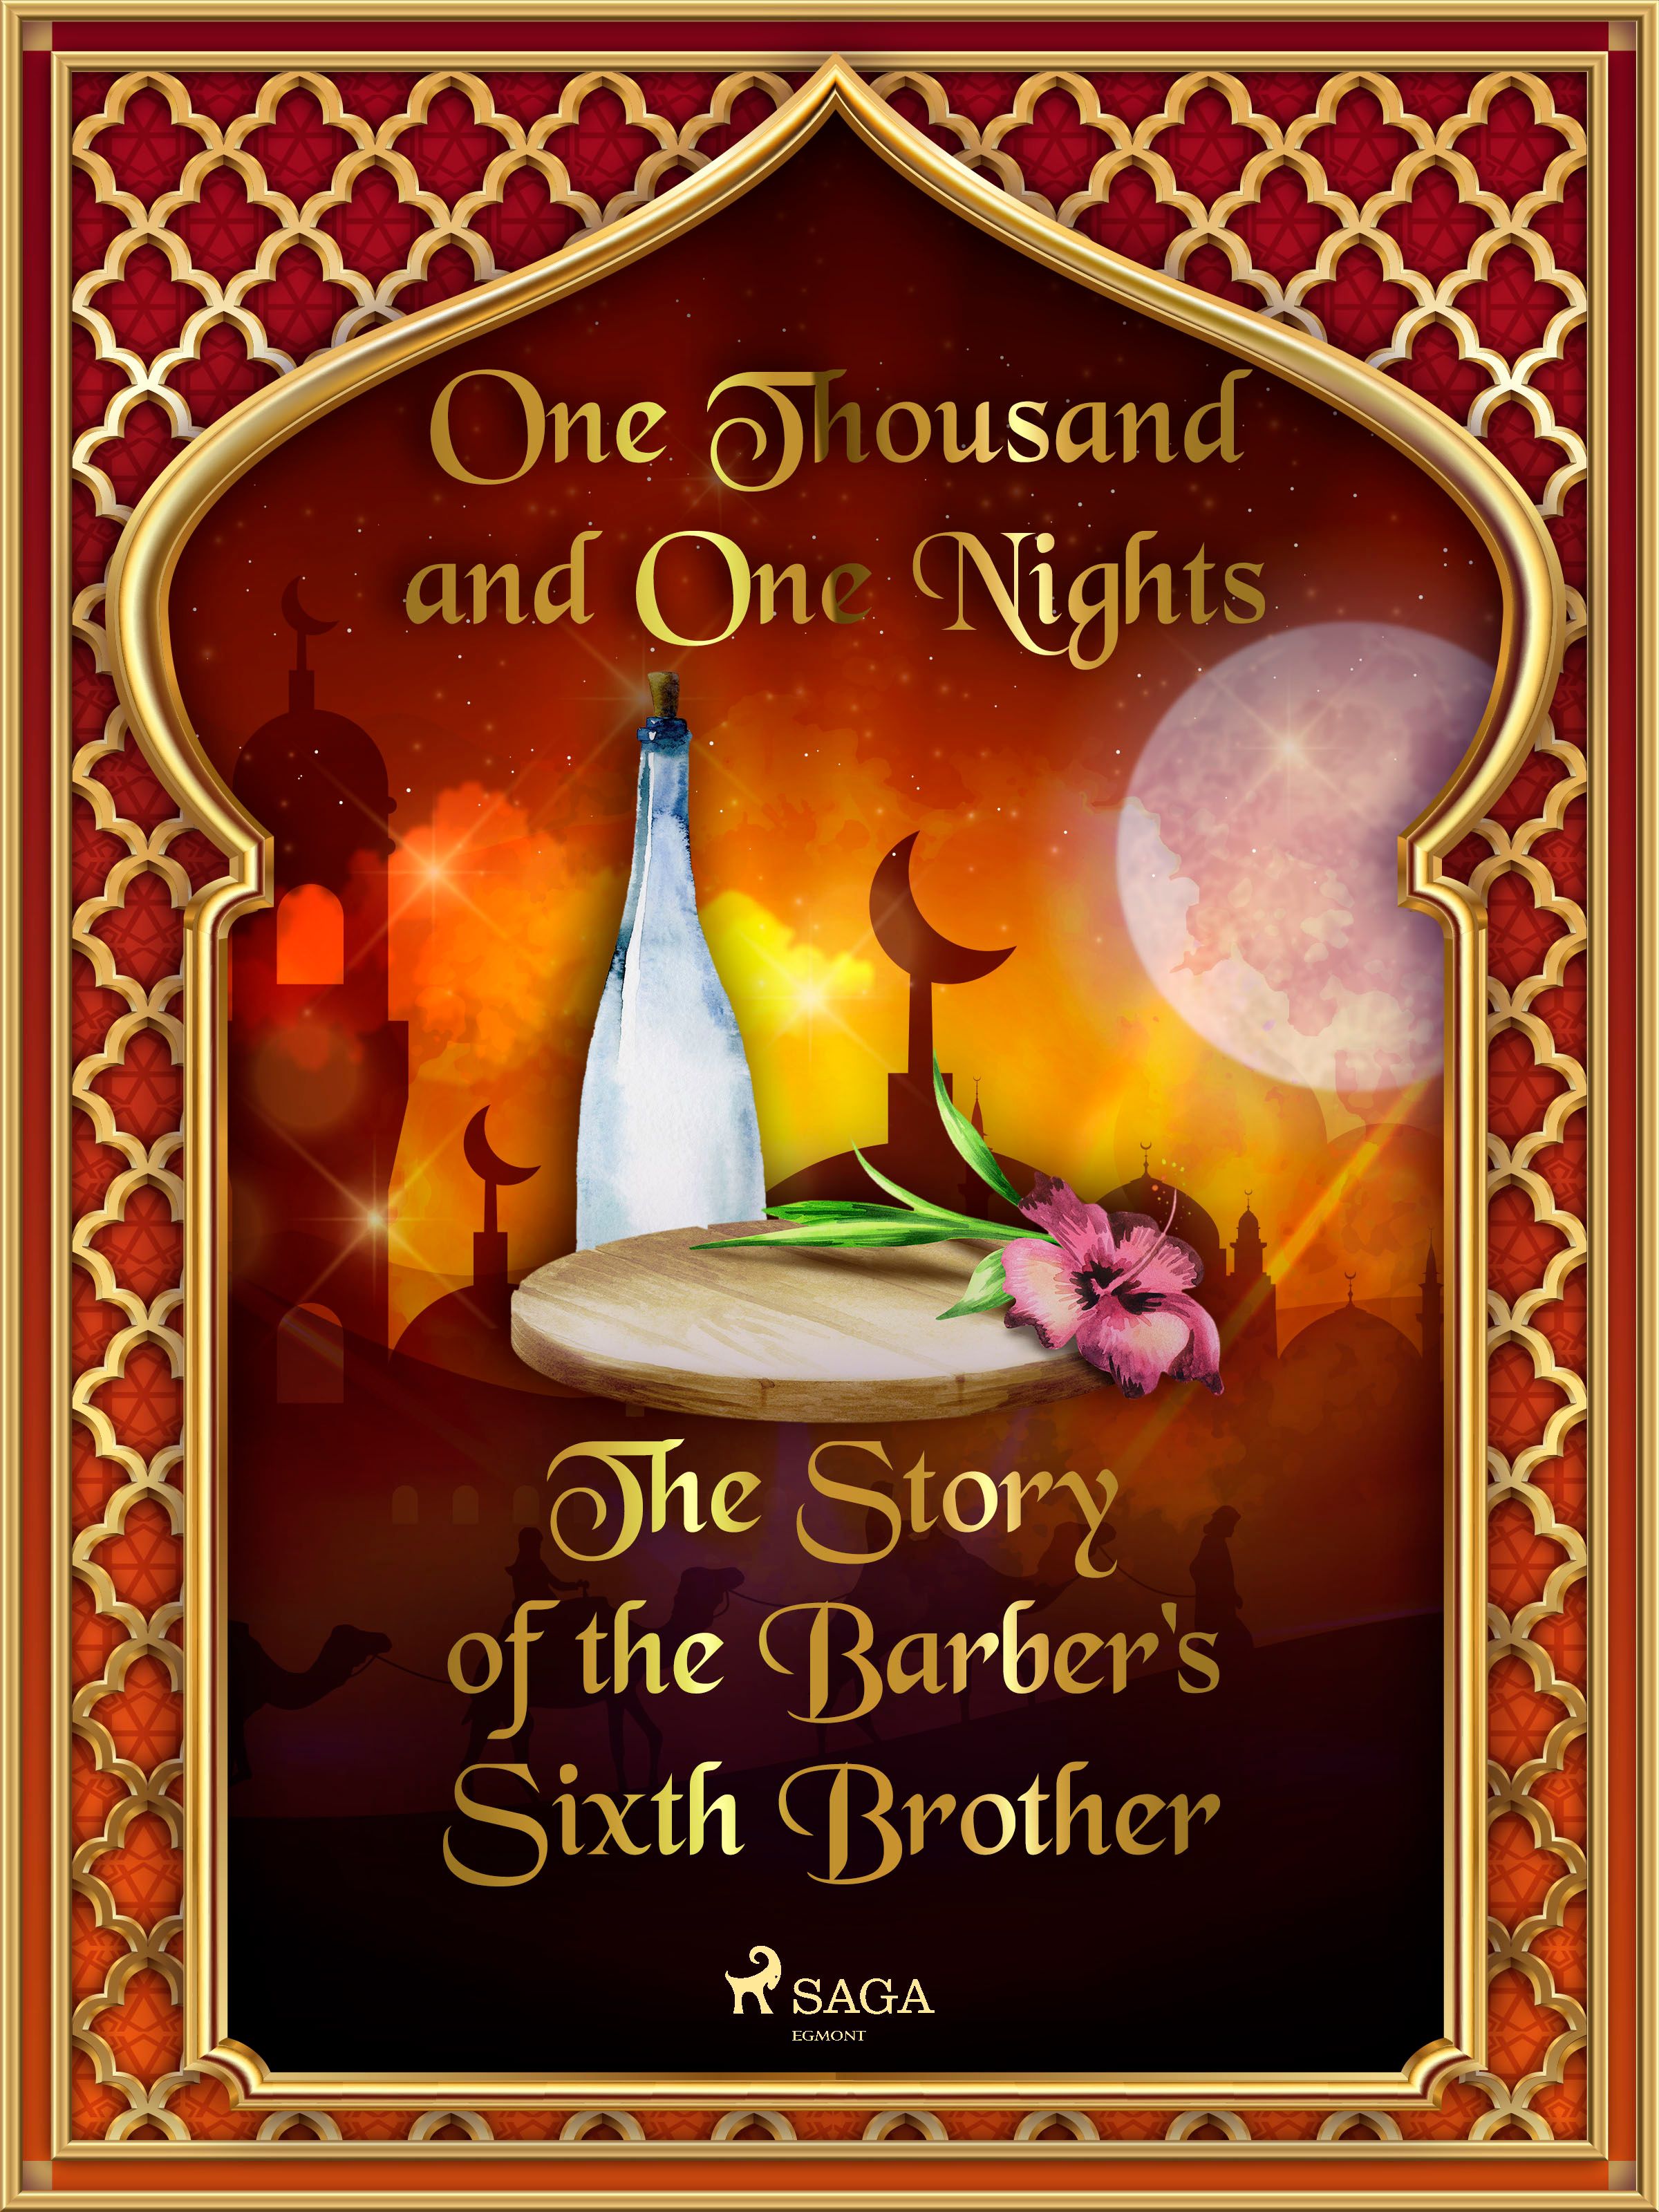 The Story of the Barber's Sixth Brother, e-bok av One Thousand and One Nights